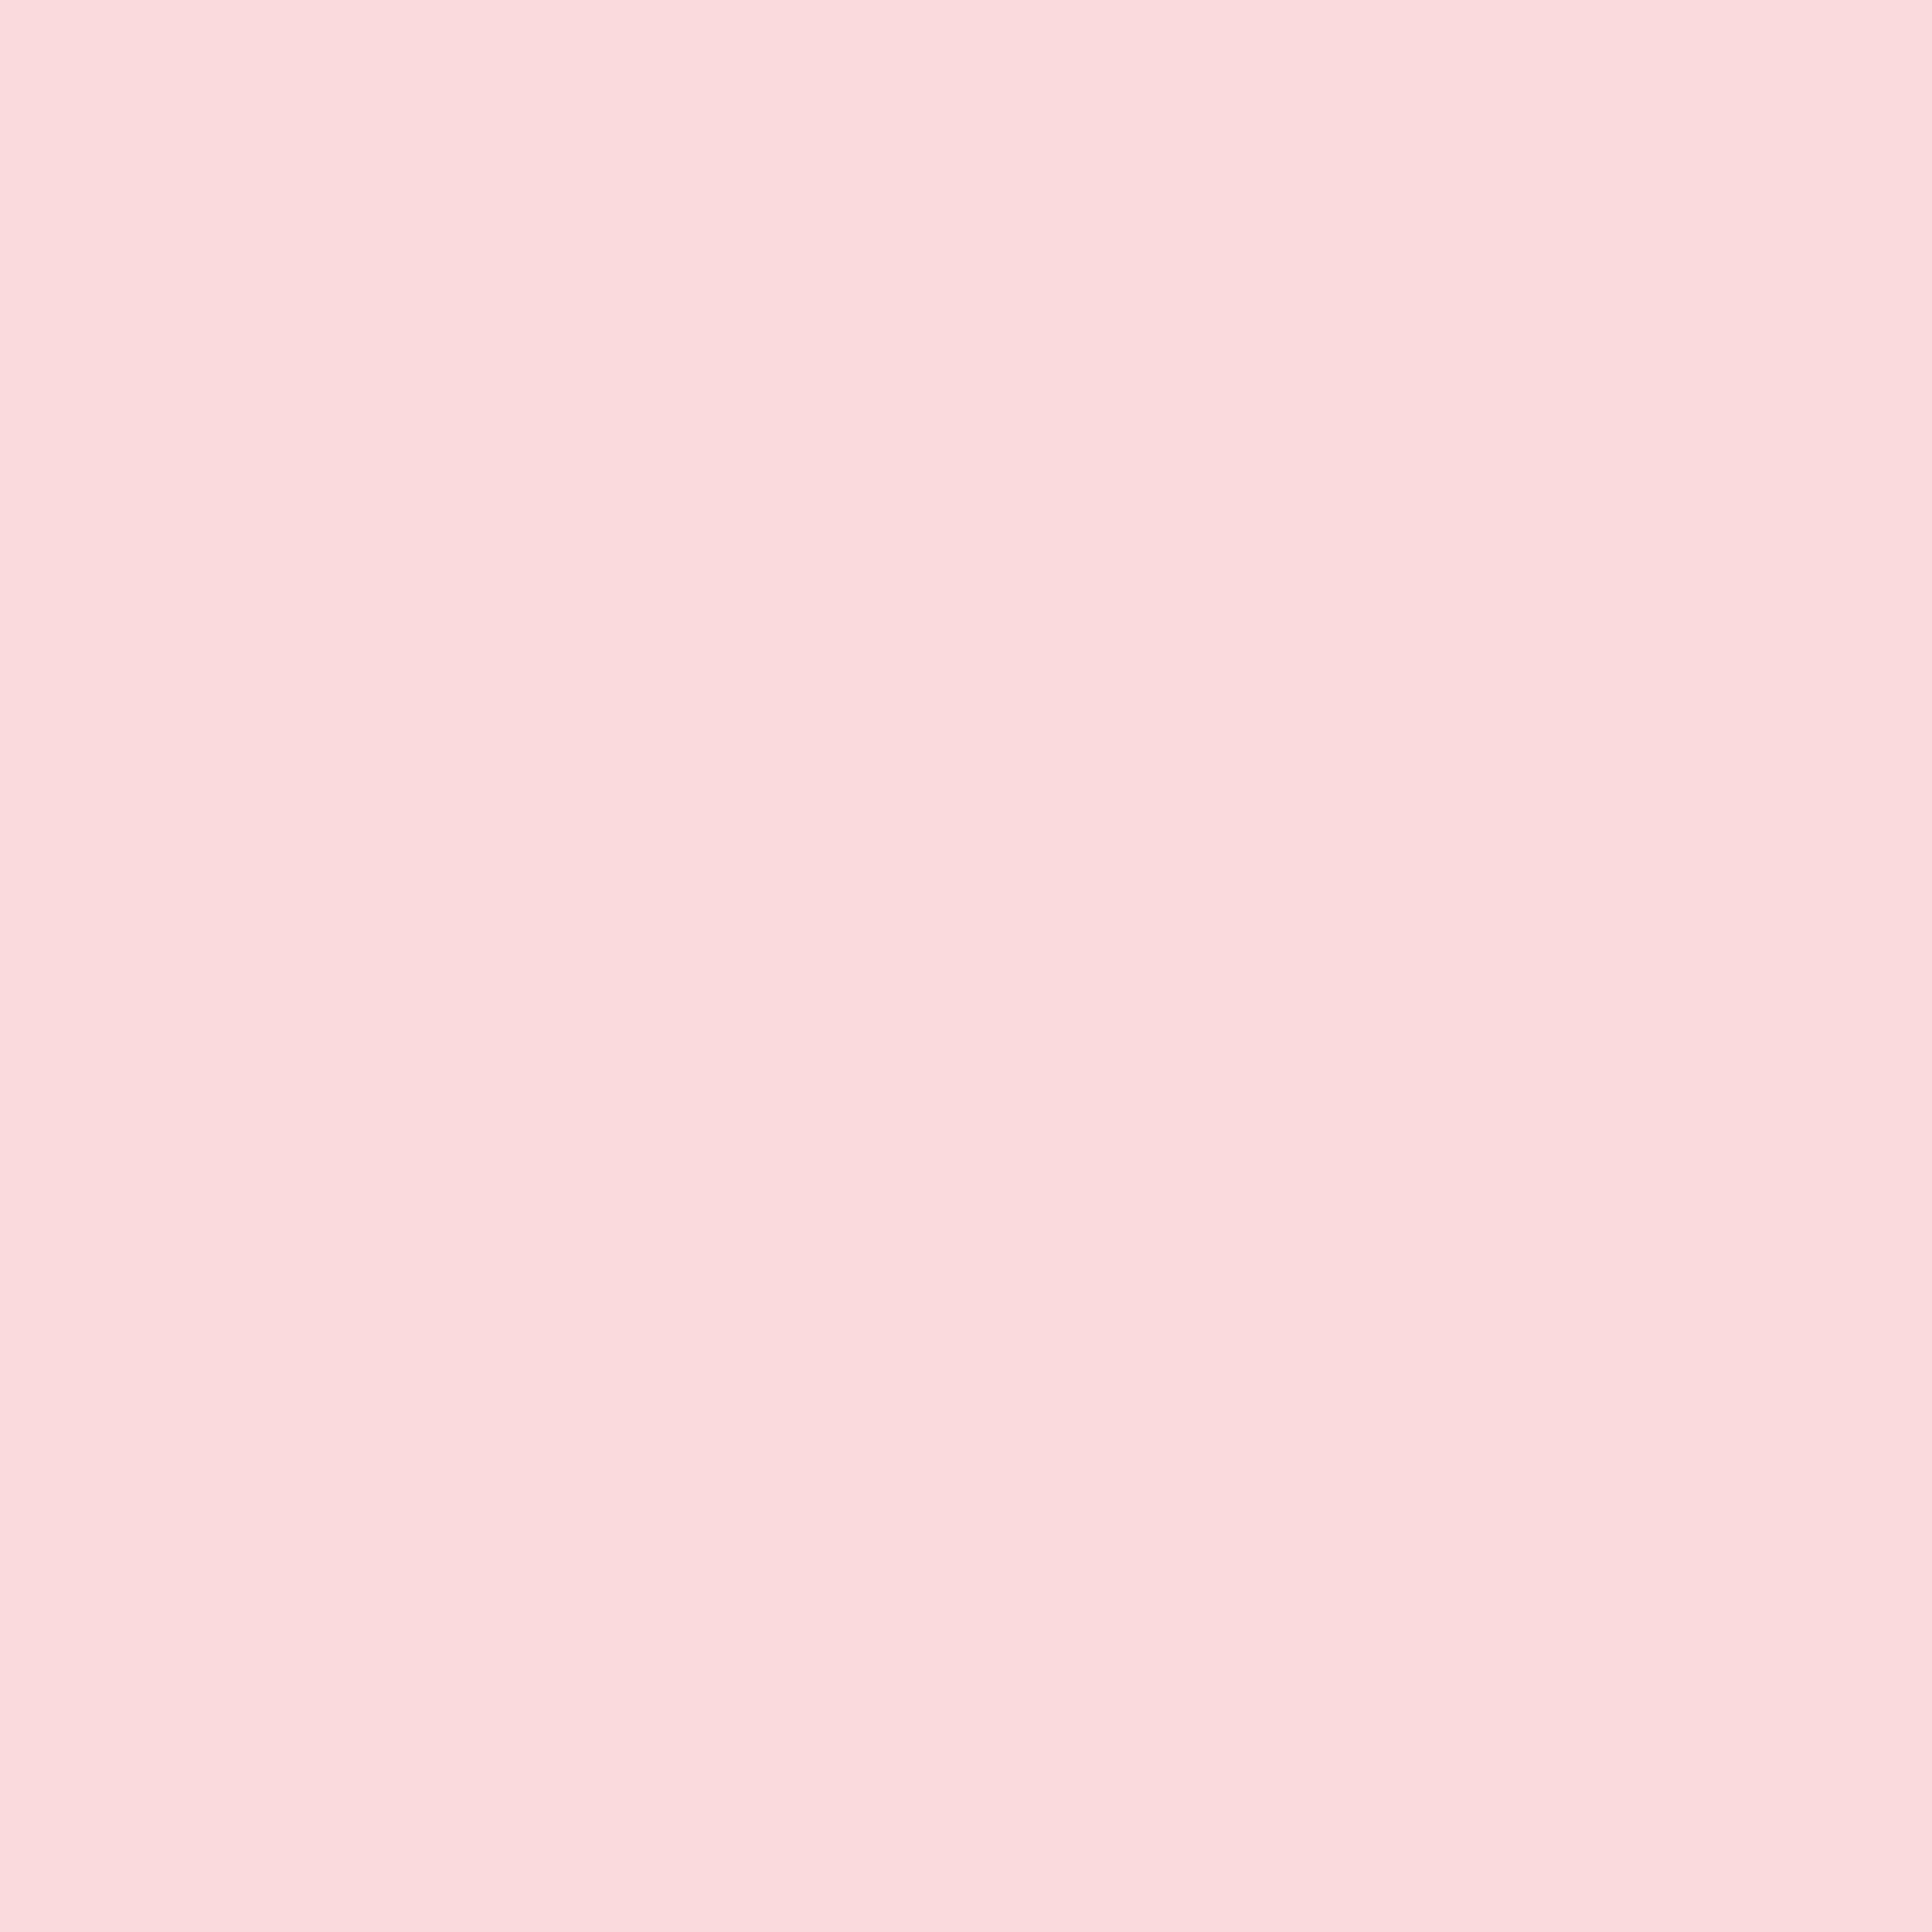 2732x2732 Pale Pink Solid Color Background